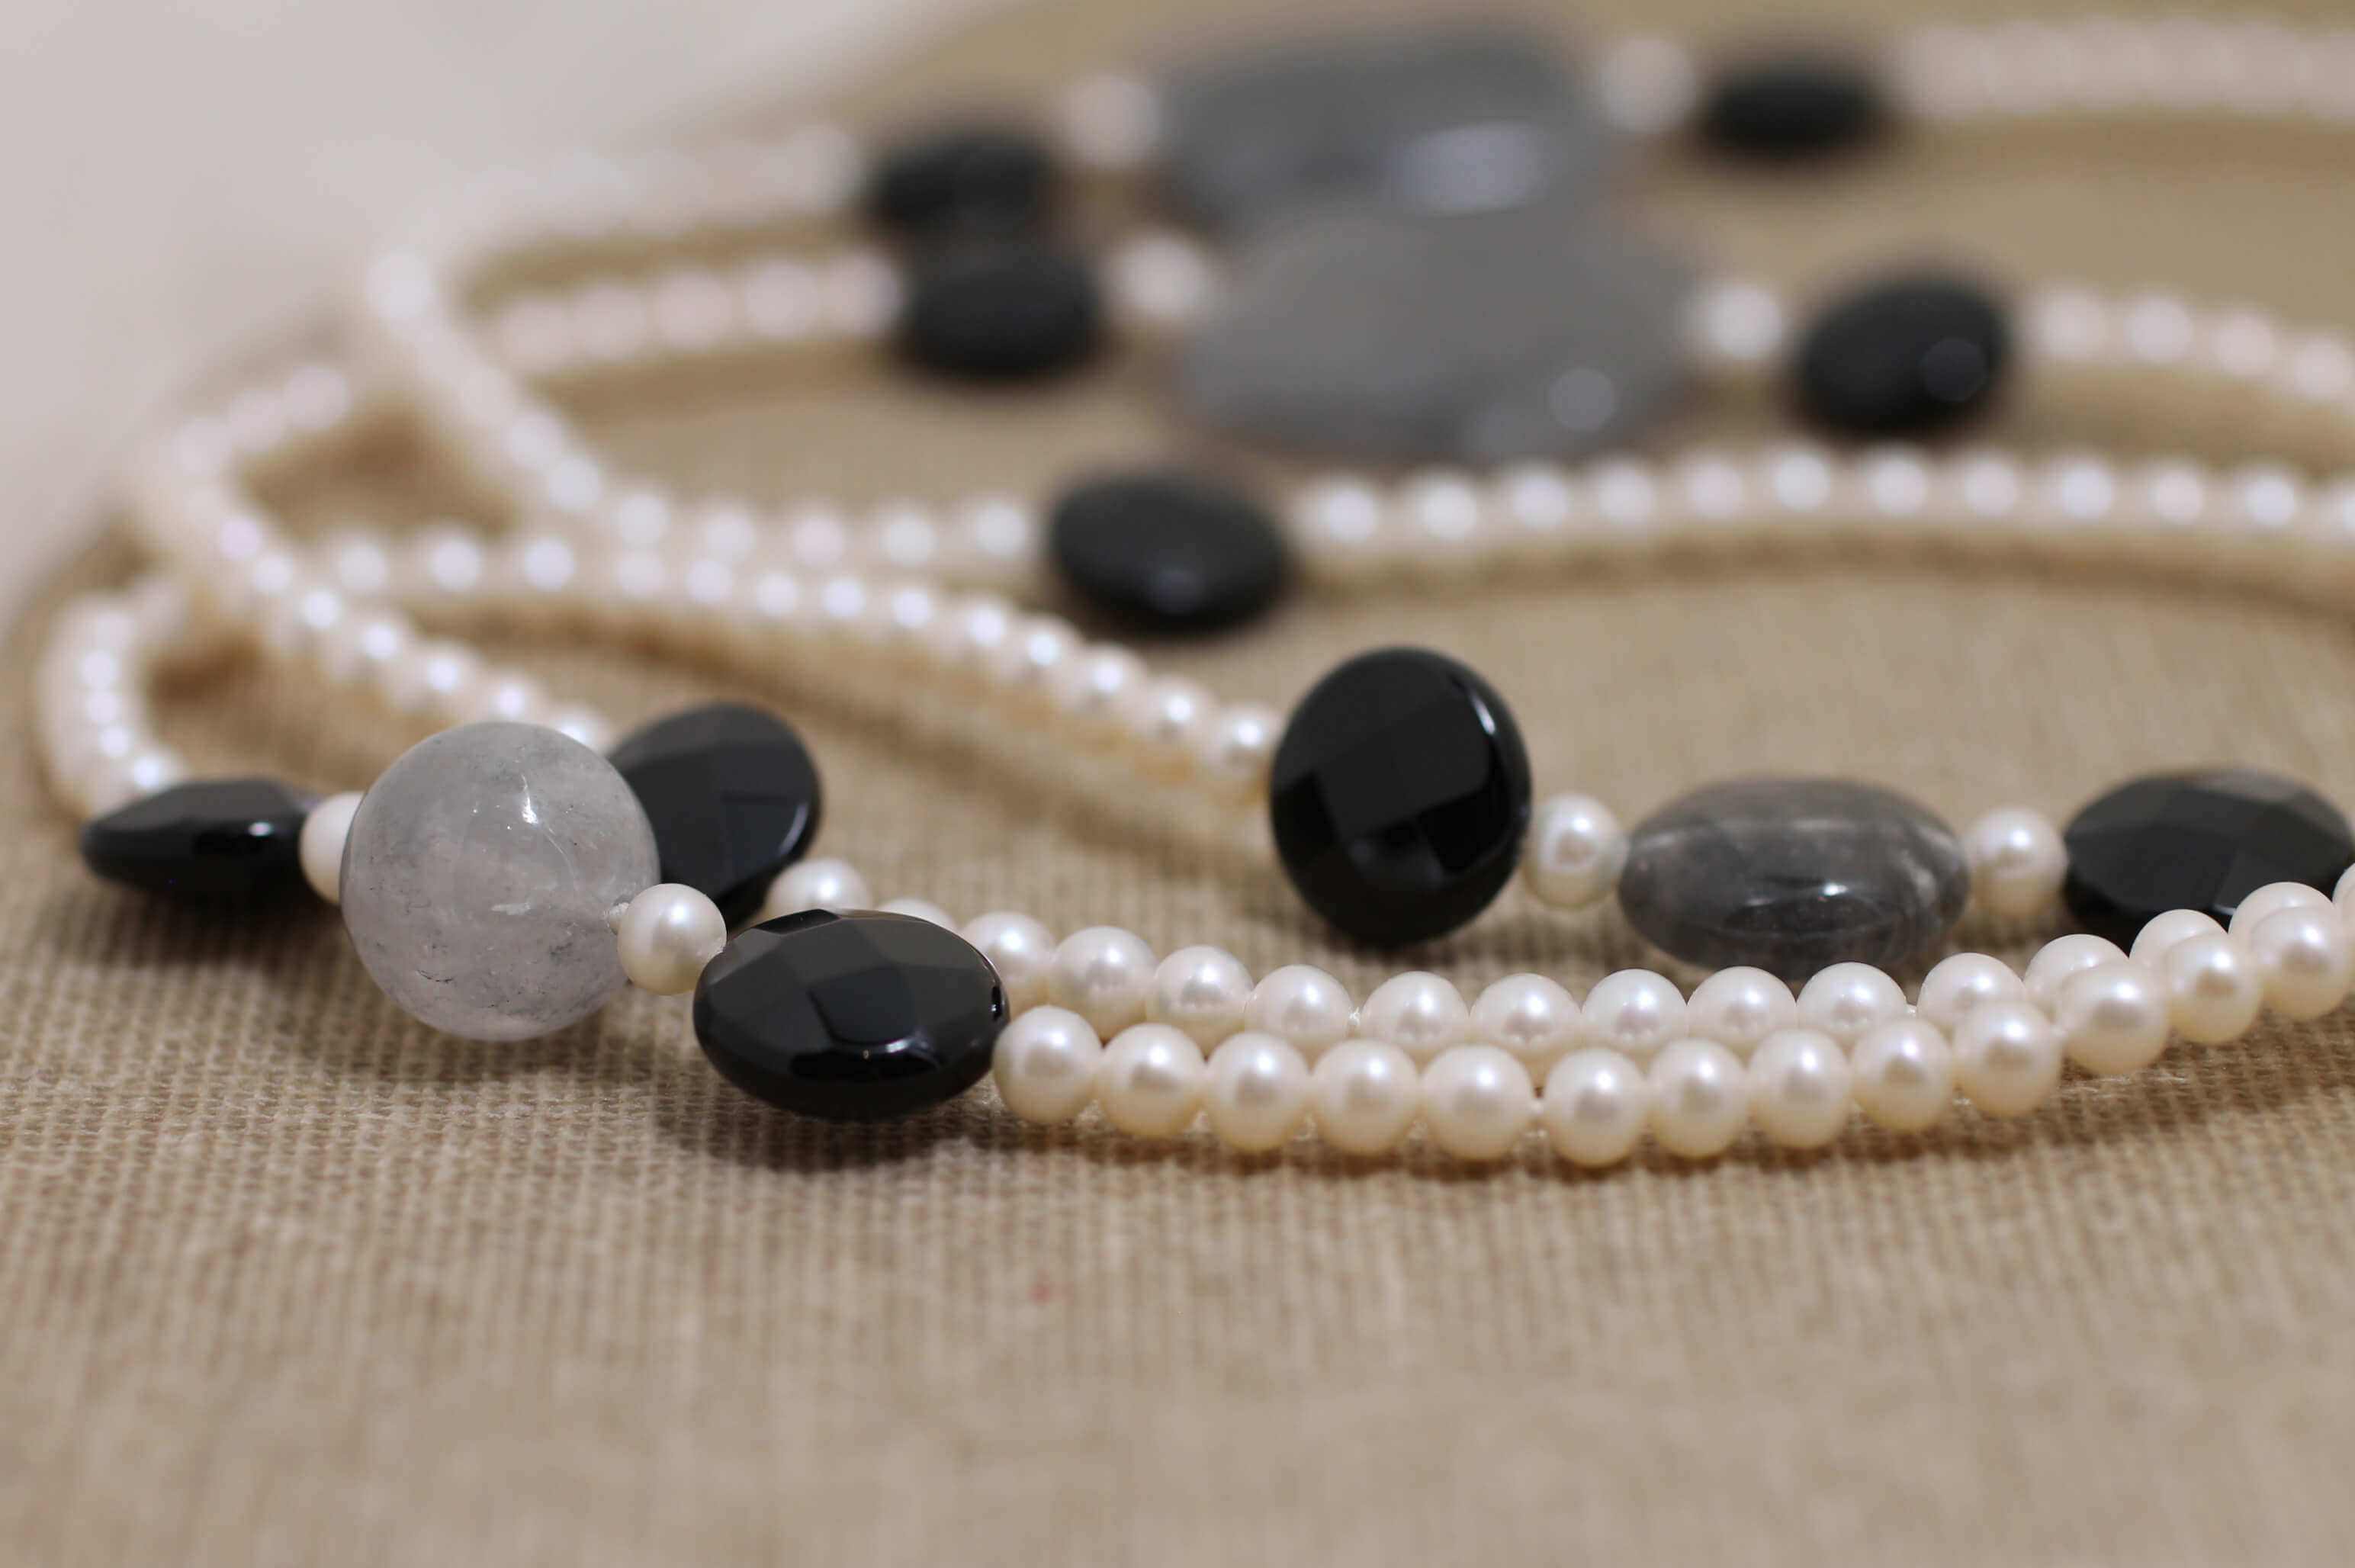 Pearls, Onyx and Quartz necklace